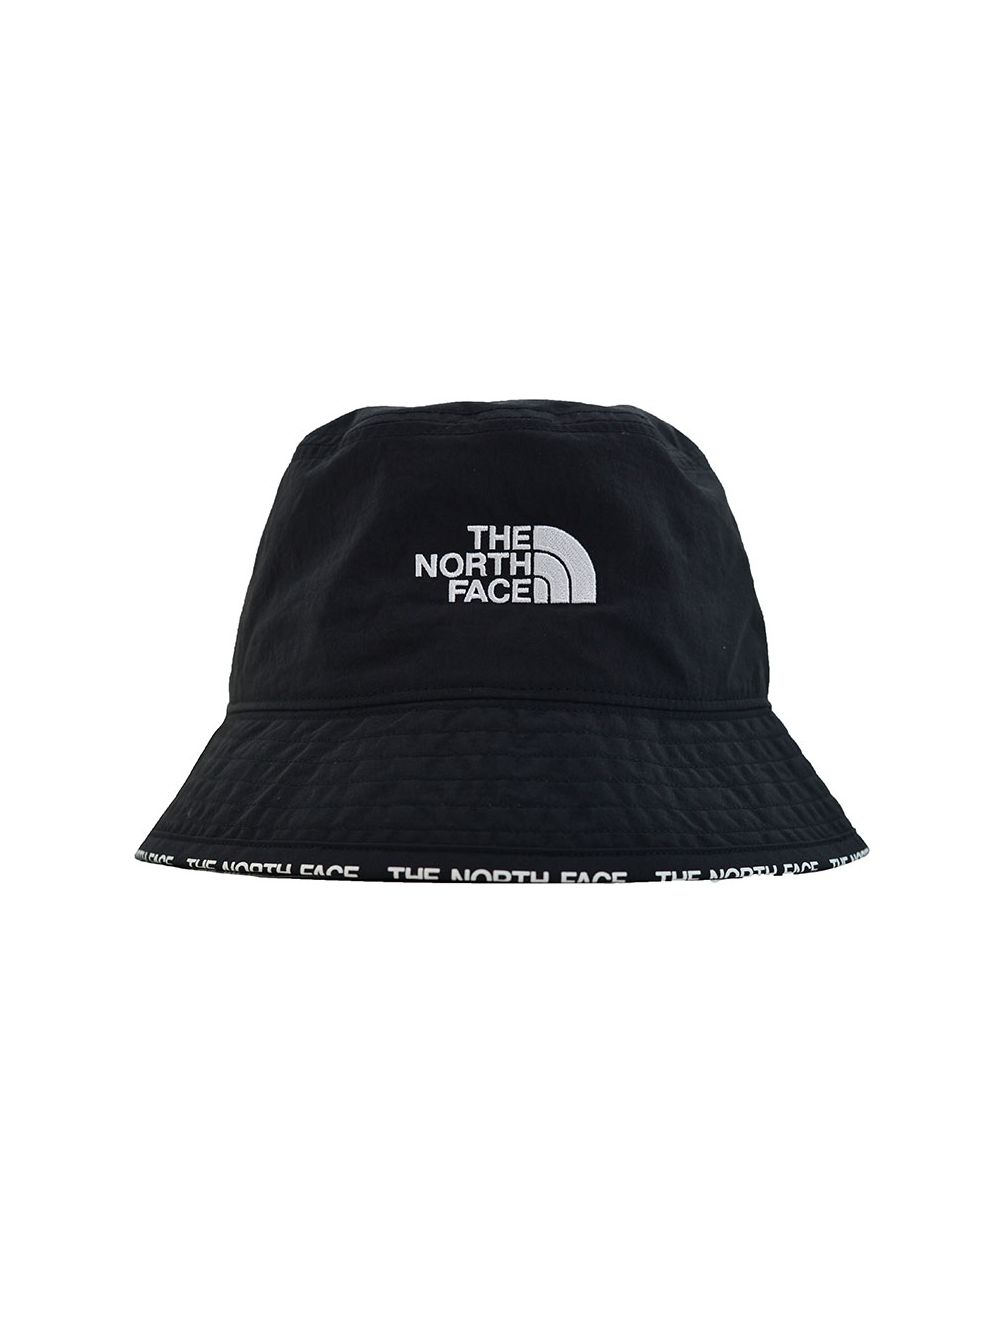 The North Face Cypress Bucket Hat Black